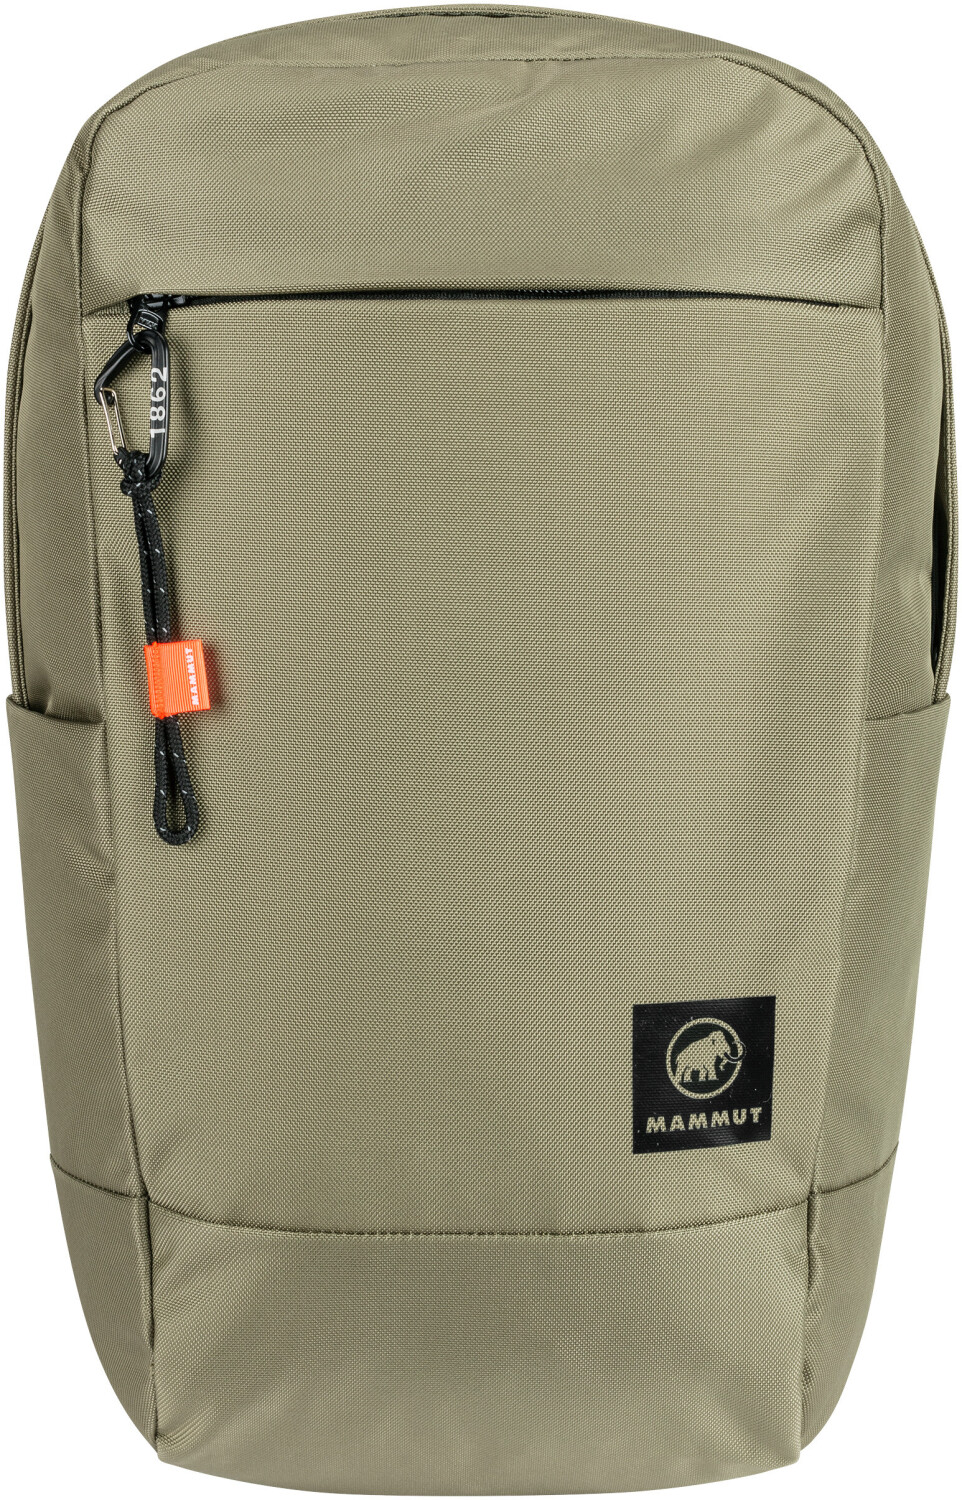 Buy Mammut Xeron 25 tin from £68.15 (Today) – Best Deals on idealo.co.uk